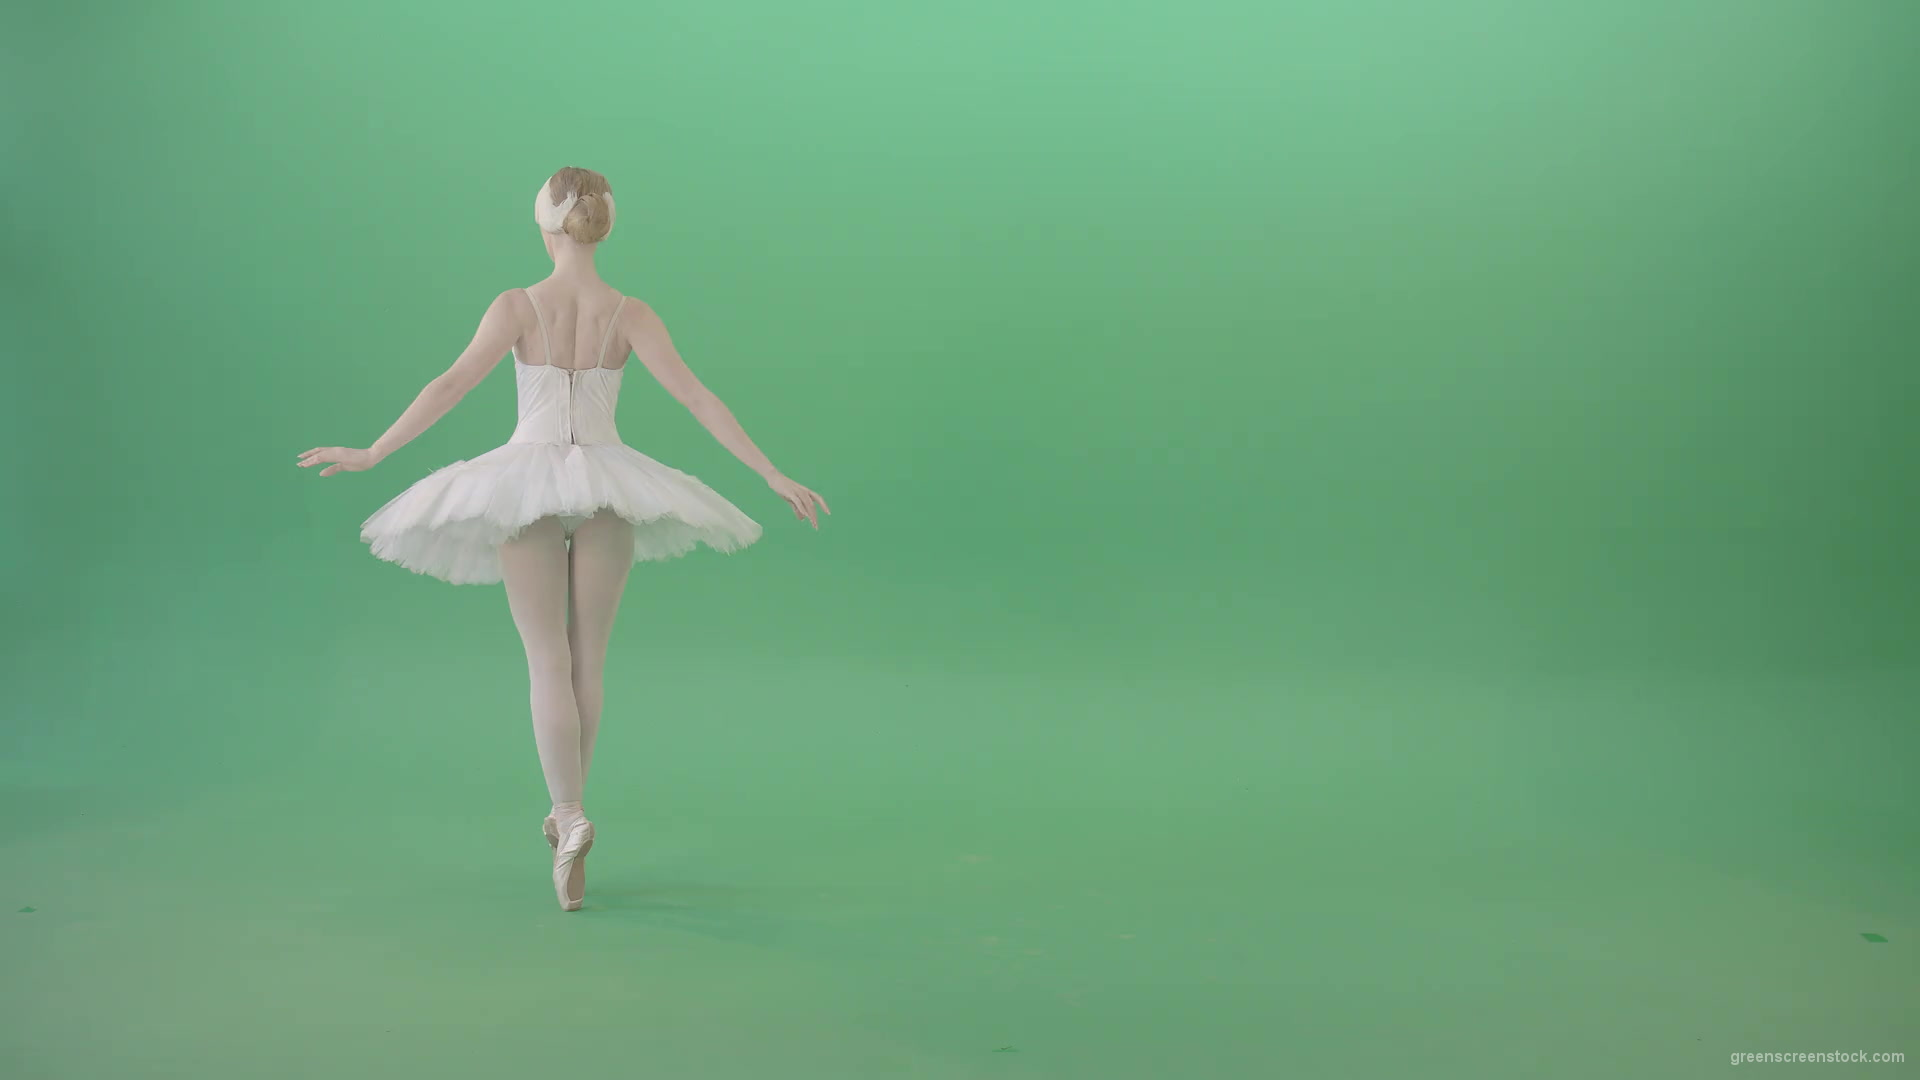 Back-side-view-ballet-dancing-tiny-girl-performs-in-green-screen-studio-4K-Video-Footage-1920_001 Green Screen Stock